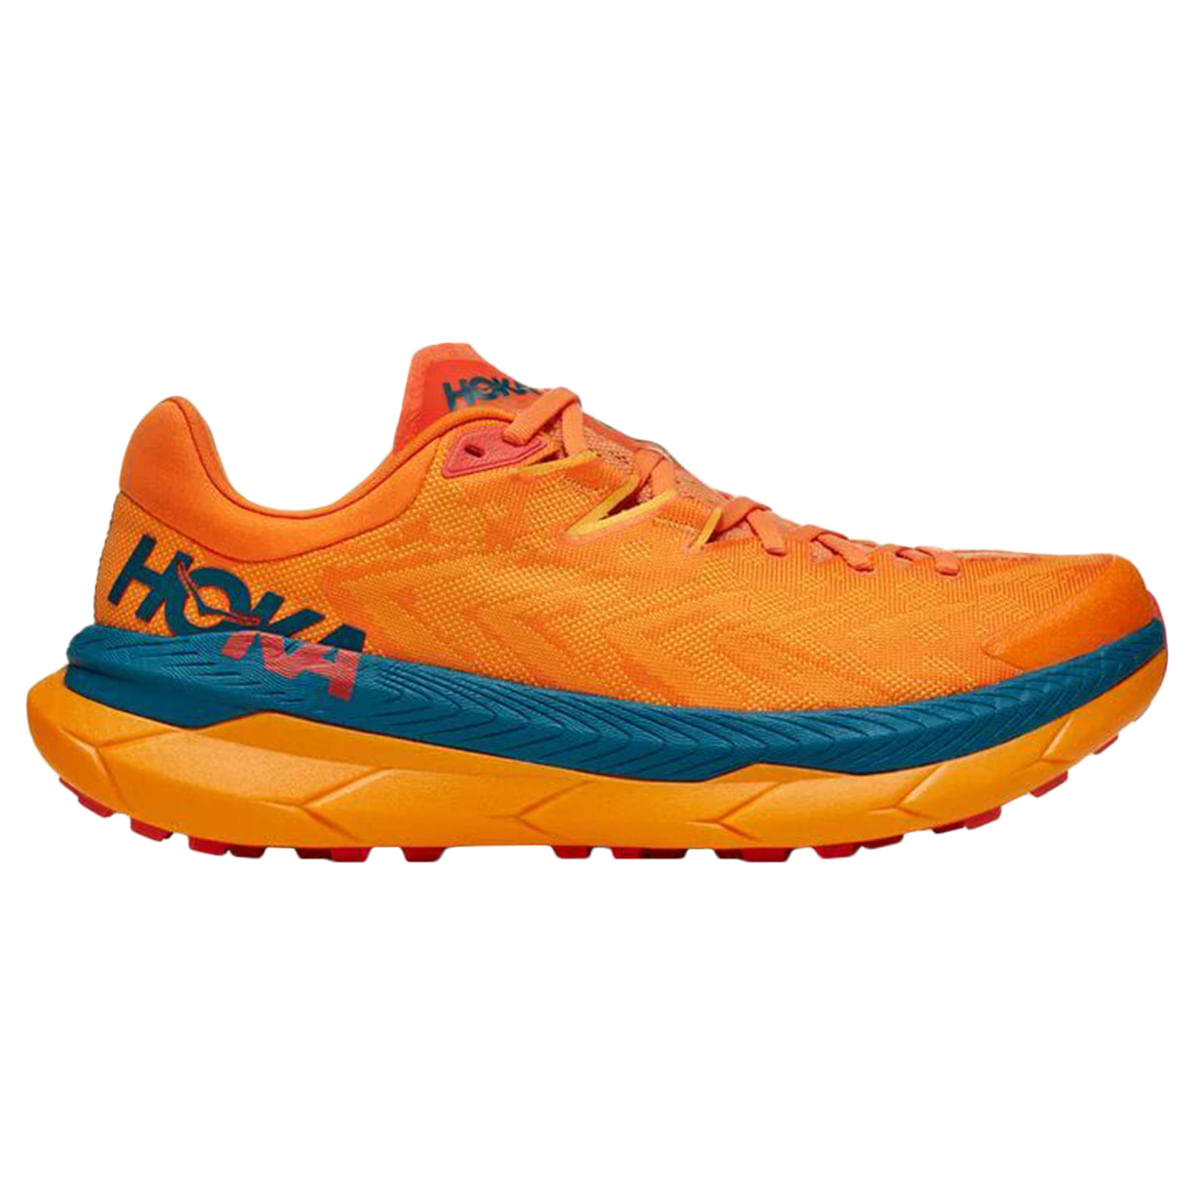 Shop Footwear At NYC's Best Sports Store - Paragon Sports